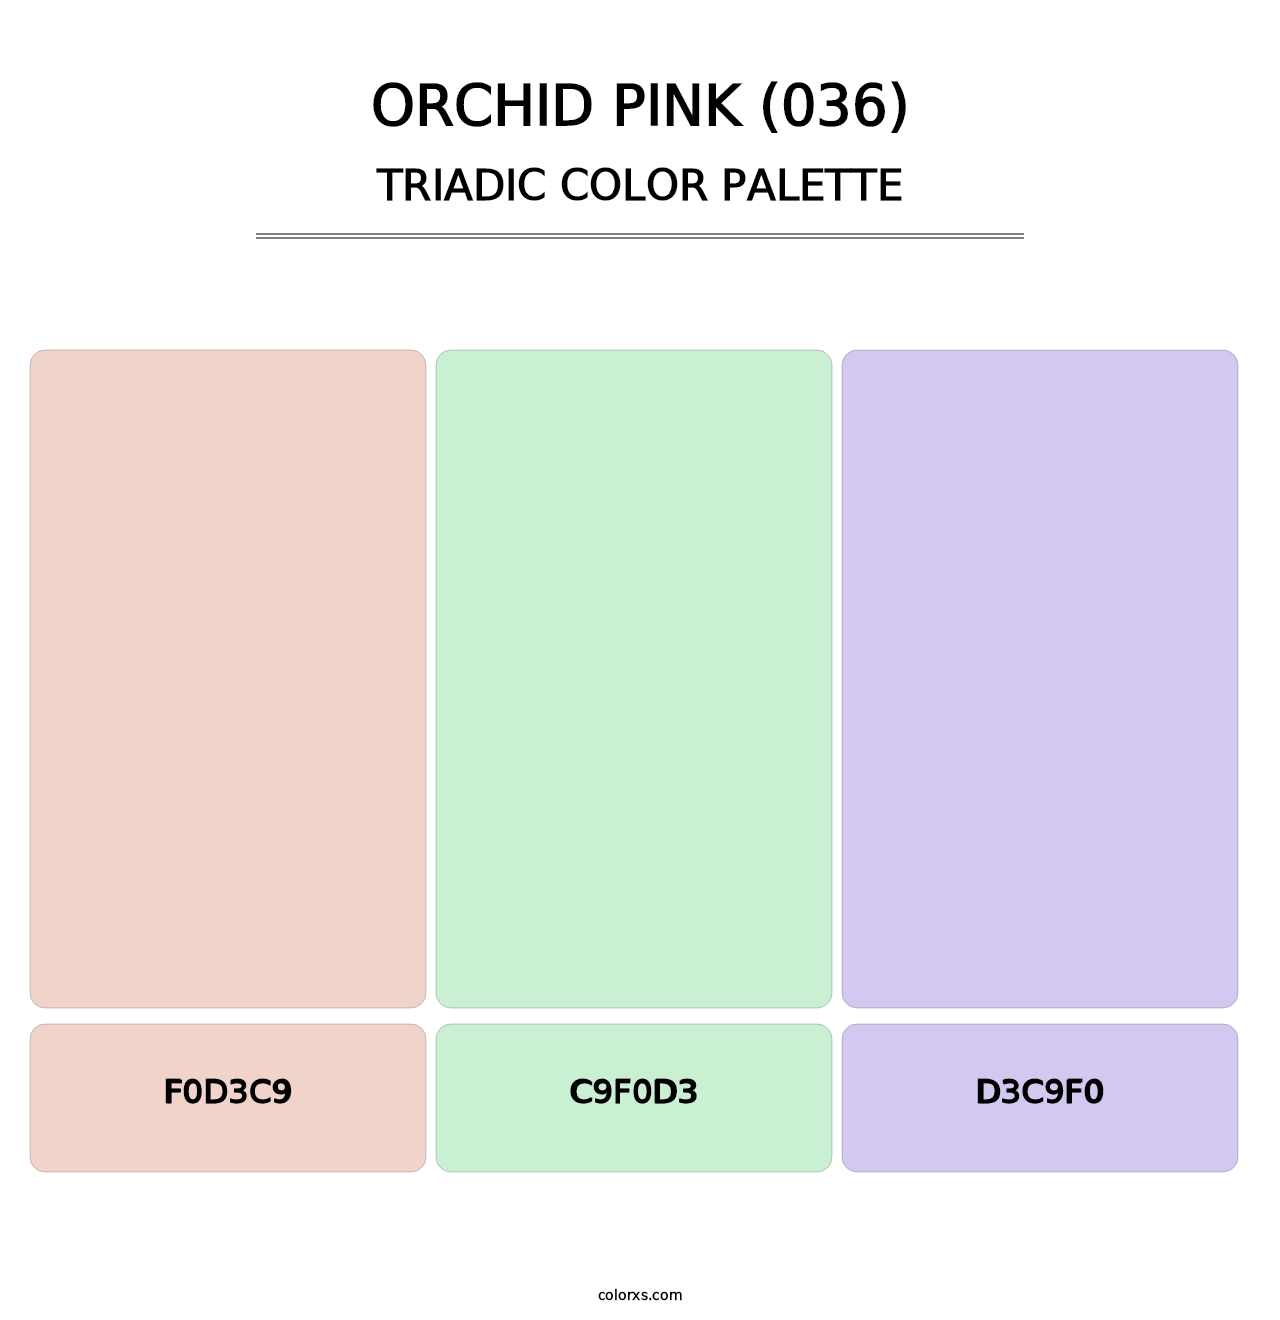 Orchid Pink (036) - Triadic Color Palette